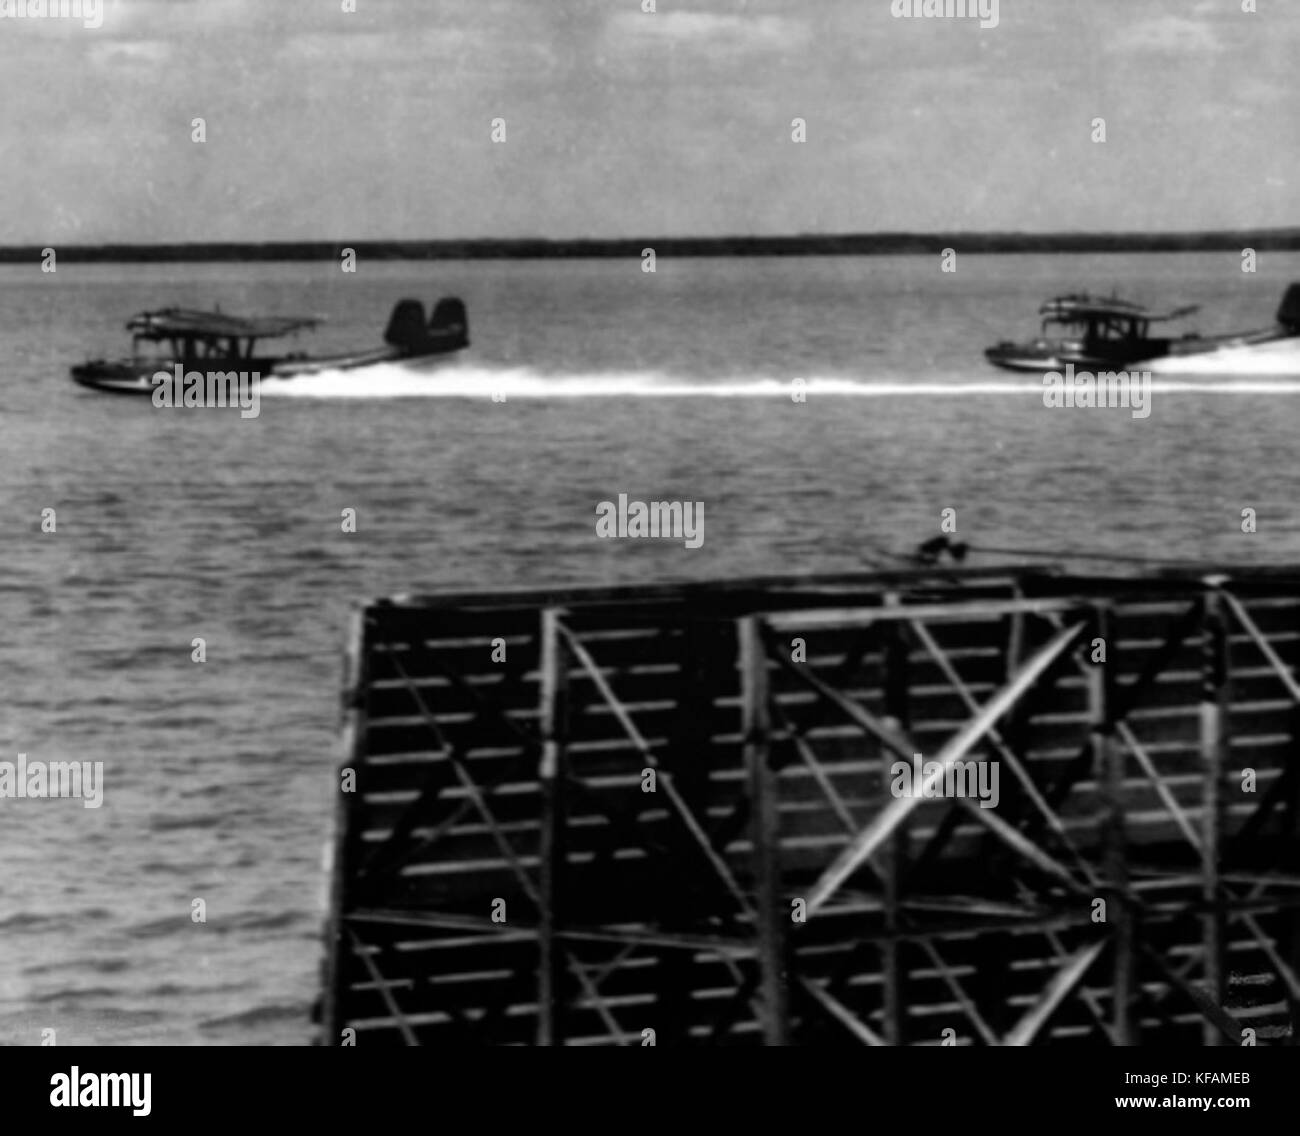 Dutch Do 24s taking off from Roebuck Bay 1941 Stock Photo